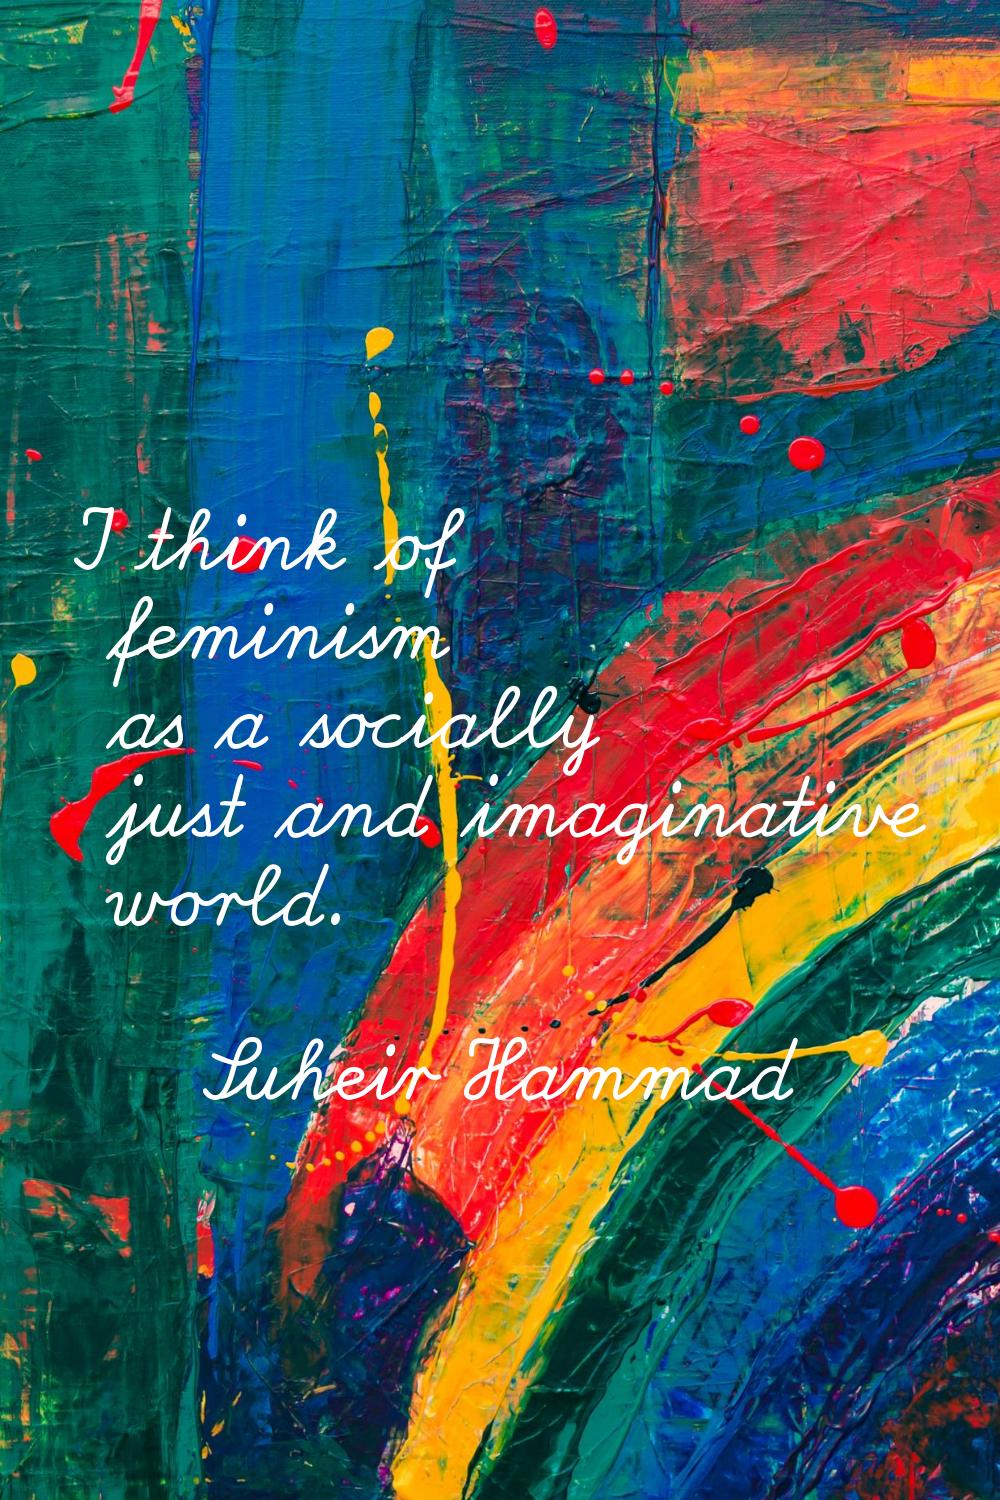 I think of feminism as a socially just and imaginative world.